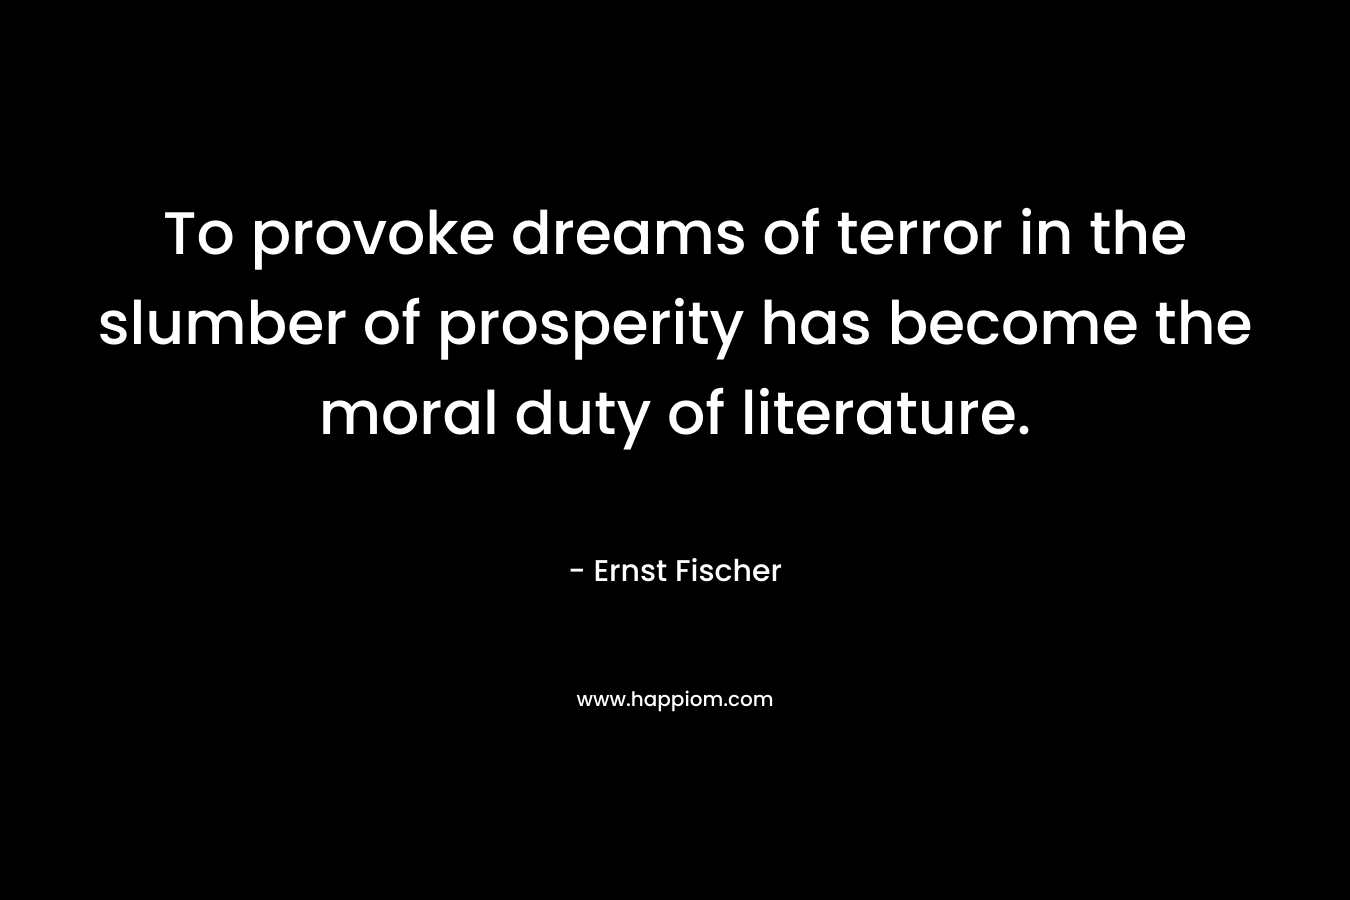 To provoke dreams of terror in the slumber of prosperity has become the moral duty of literature. – Ernst Fischer